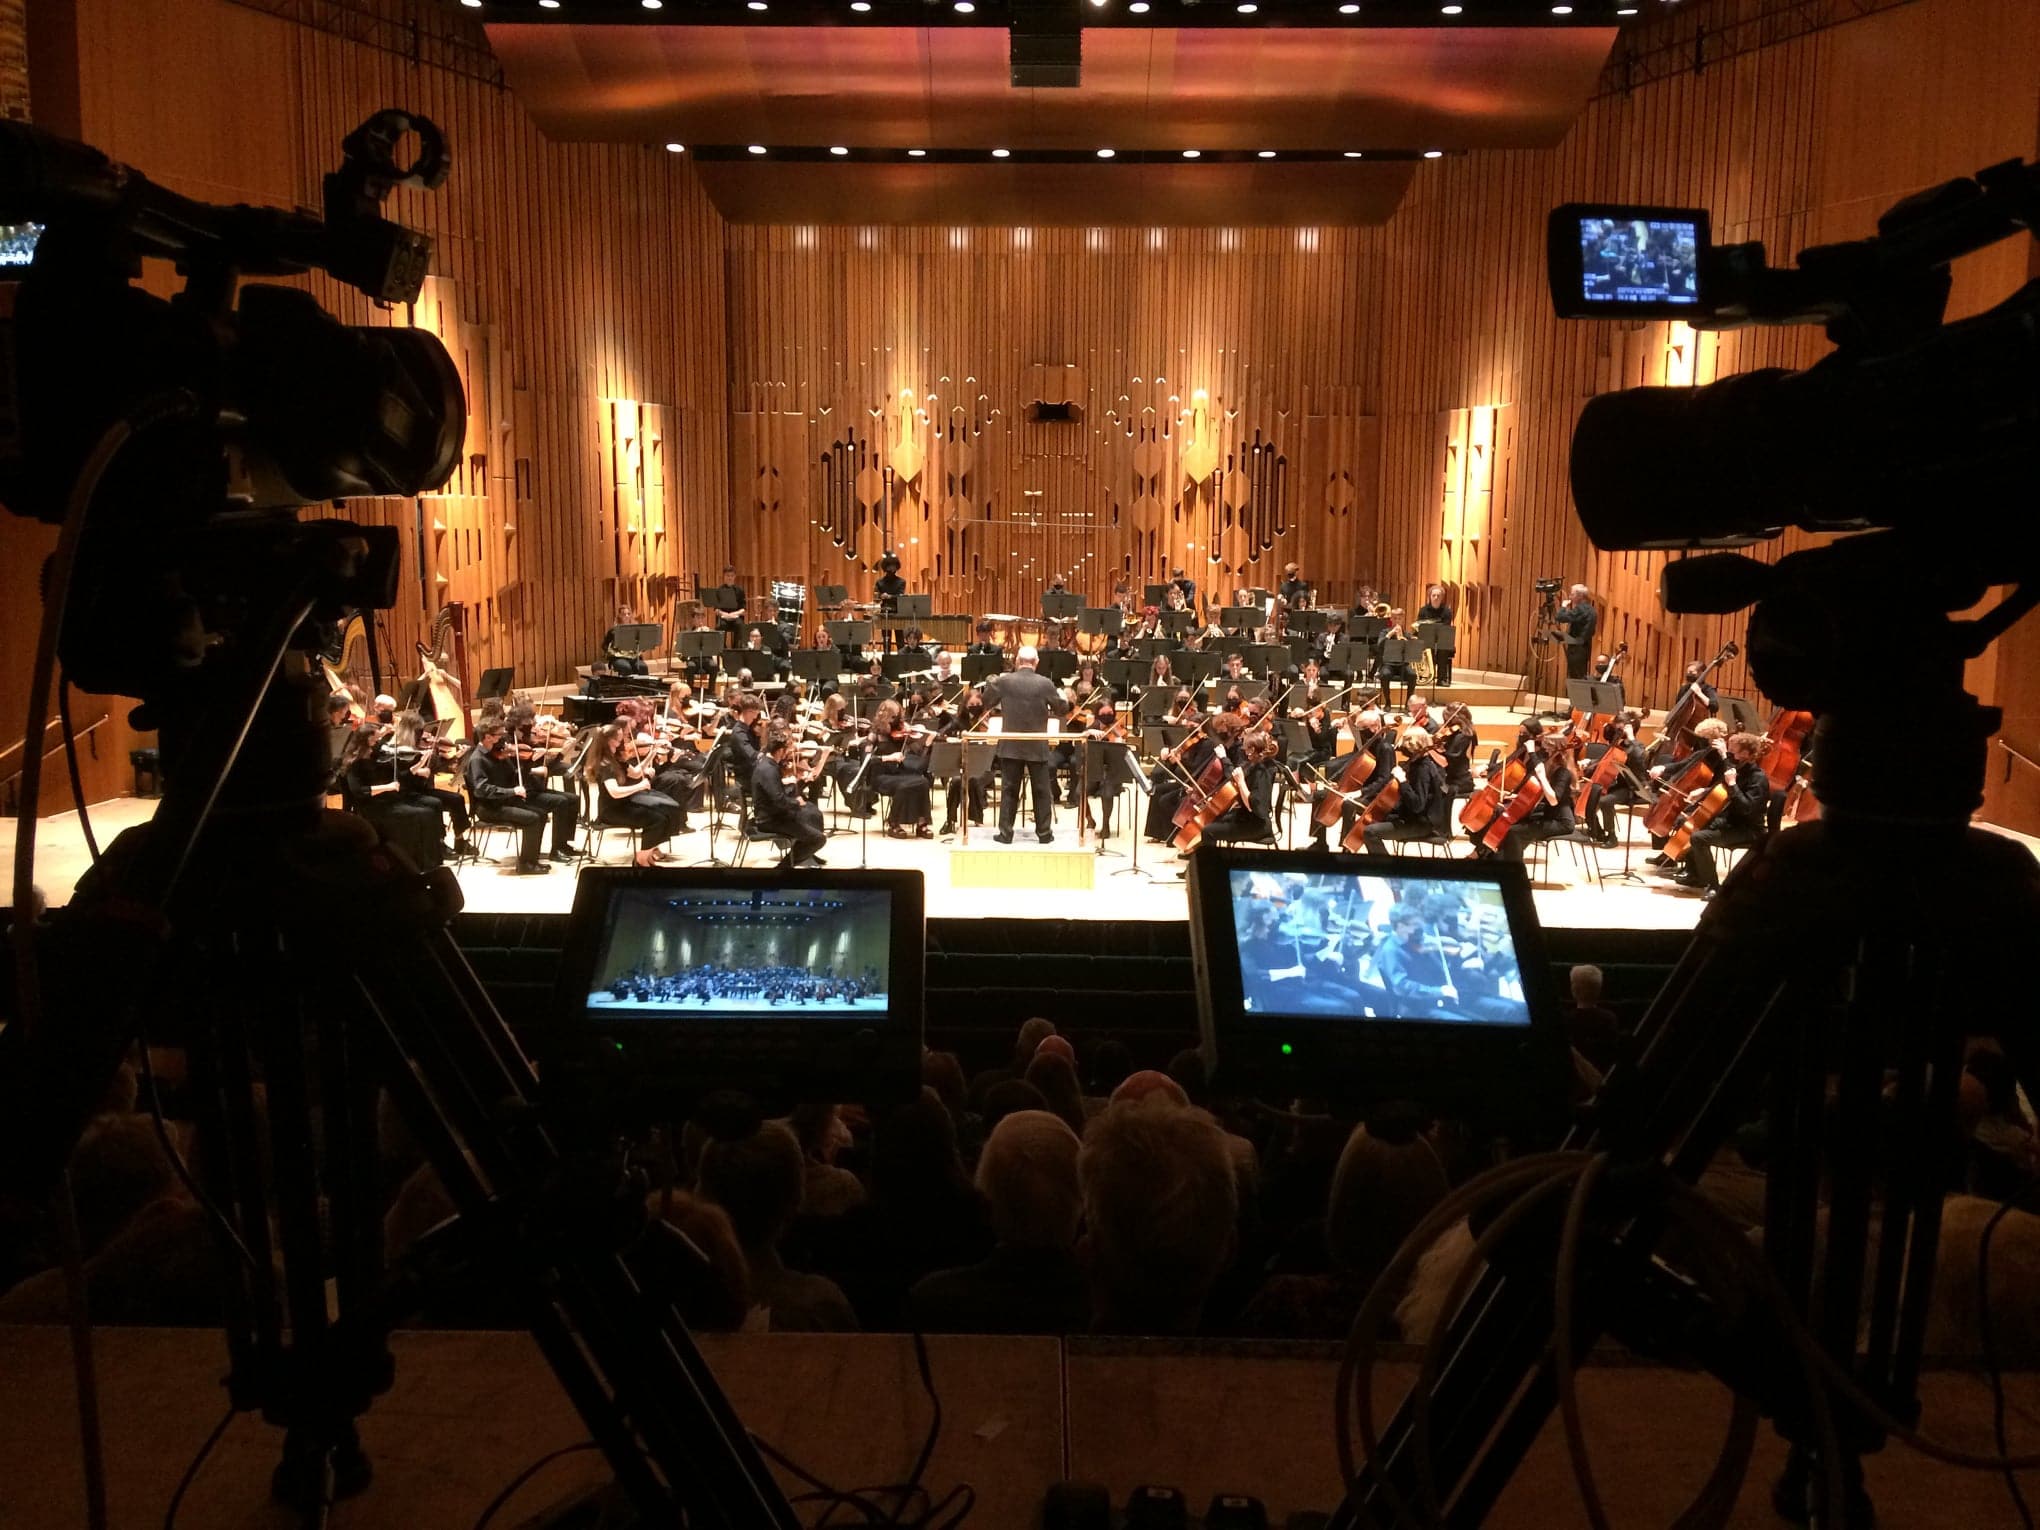 London orchestra in new revolt at conductor sacking